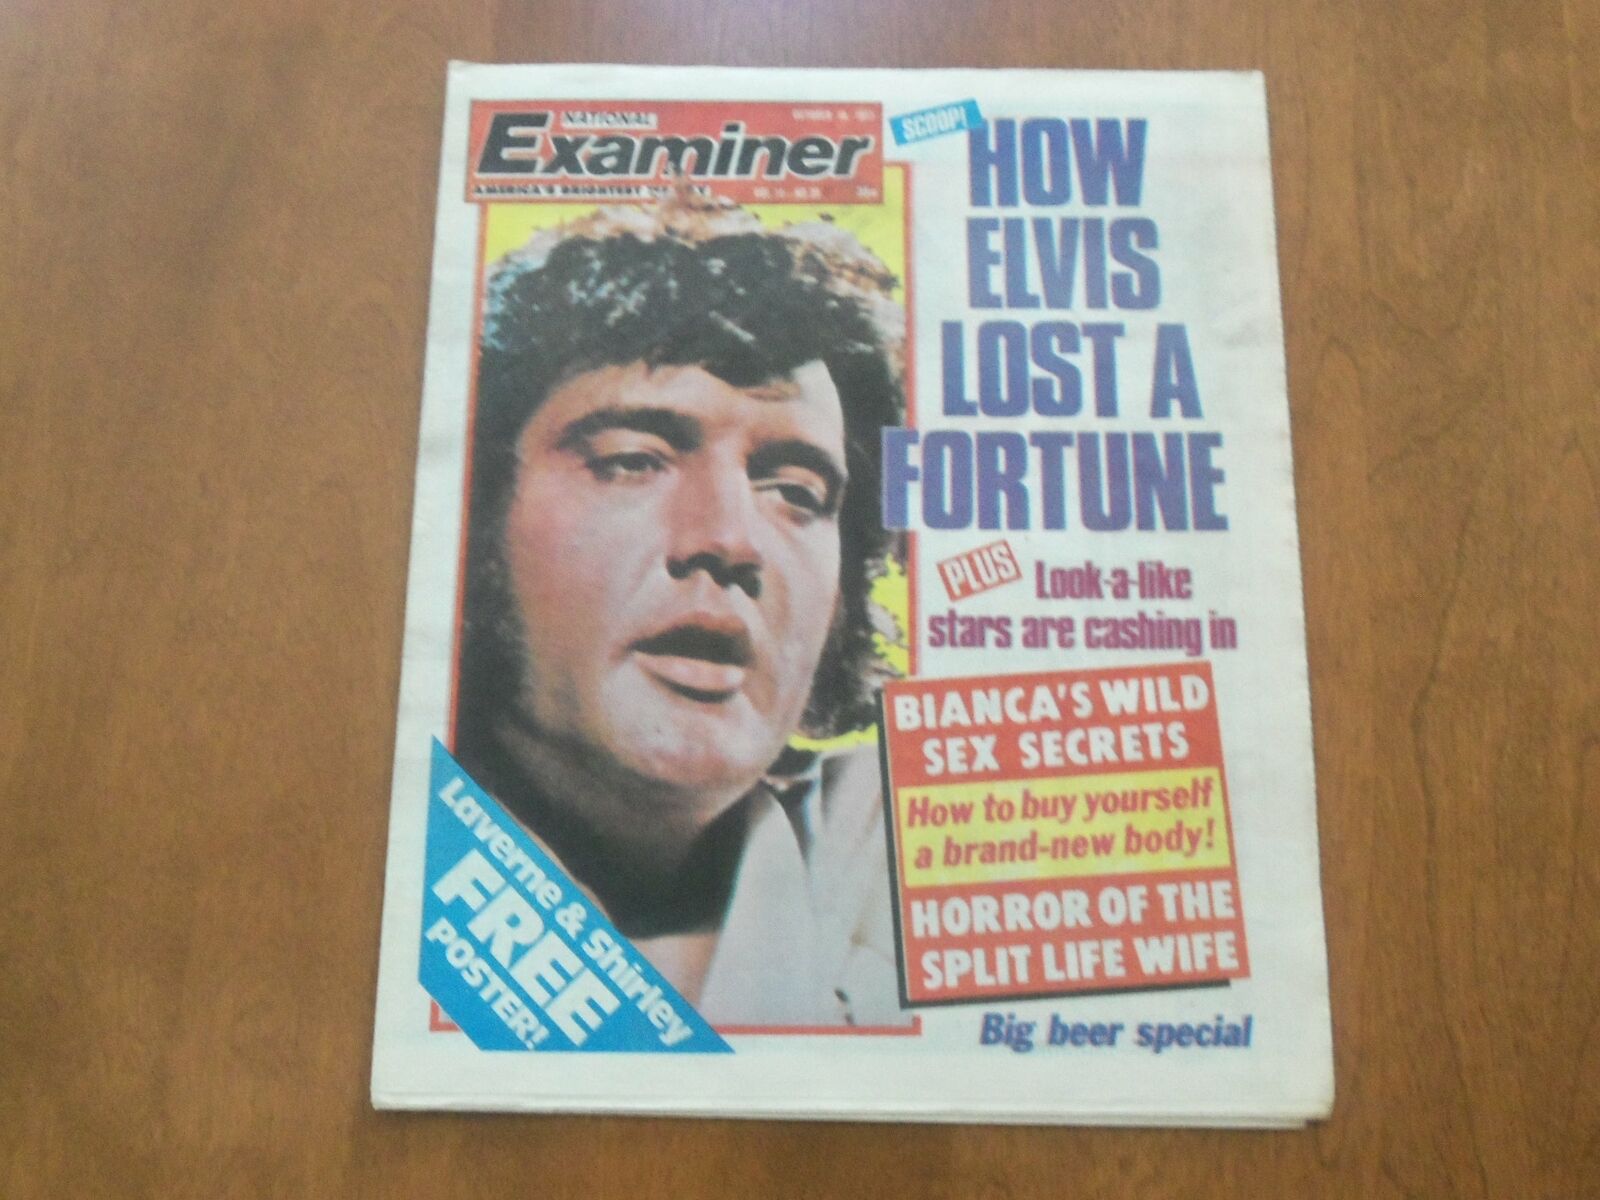 1977 OCTOBER 18 NATIONAL EXAMINER NEWSPAPER - HOW ELVIS LOST A FORTUNE - NP 4715